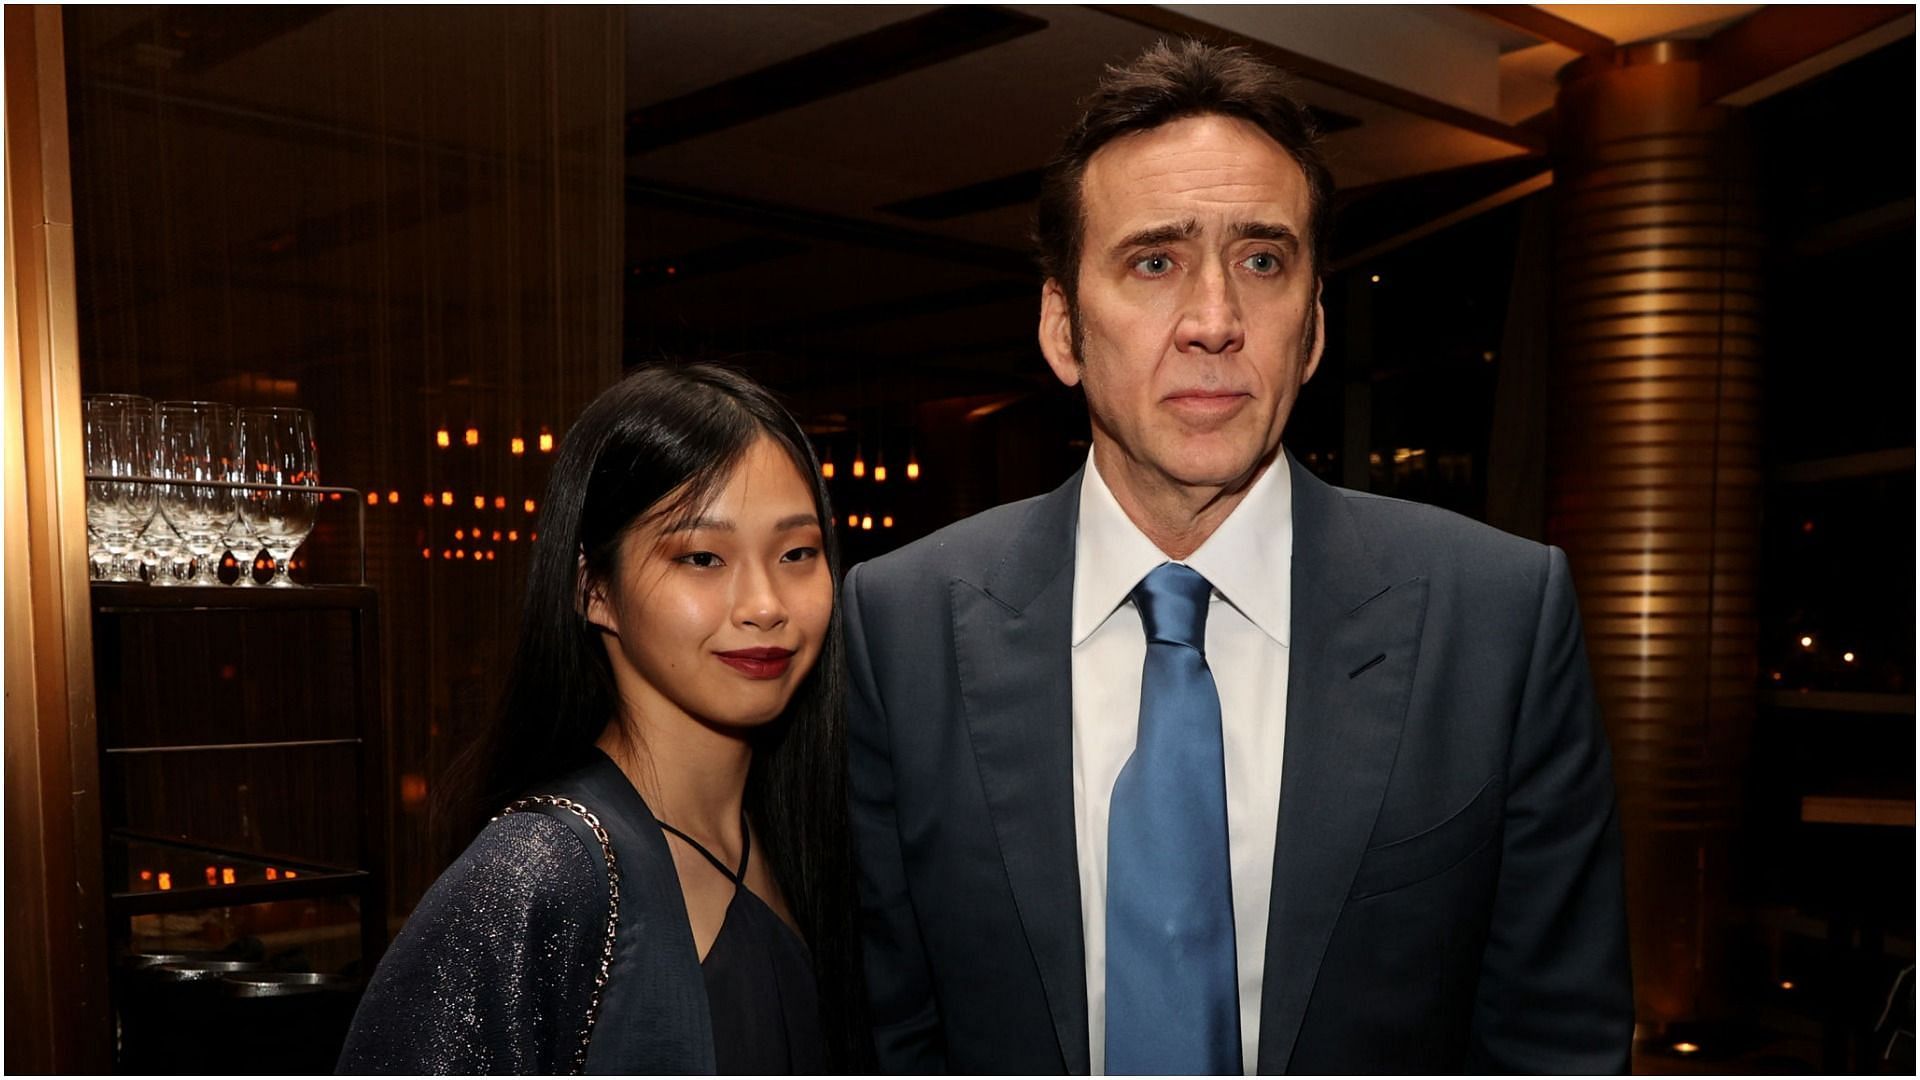 Nicolas Cage and Riko Shibata pose at the after-party for the premiere of Neon&#039;s &quot;Pig&quot; at Craft Restaurant (Image by Kevin Winter via Getty Images)